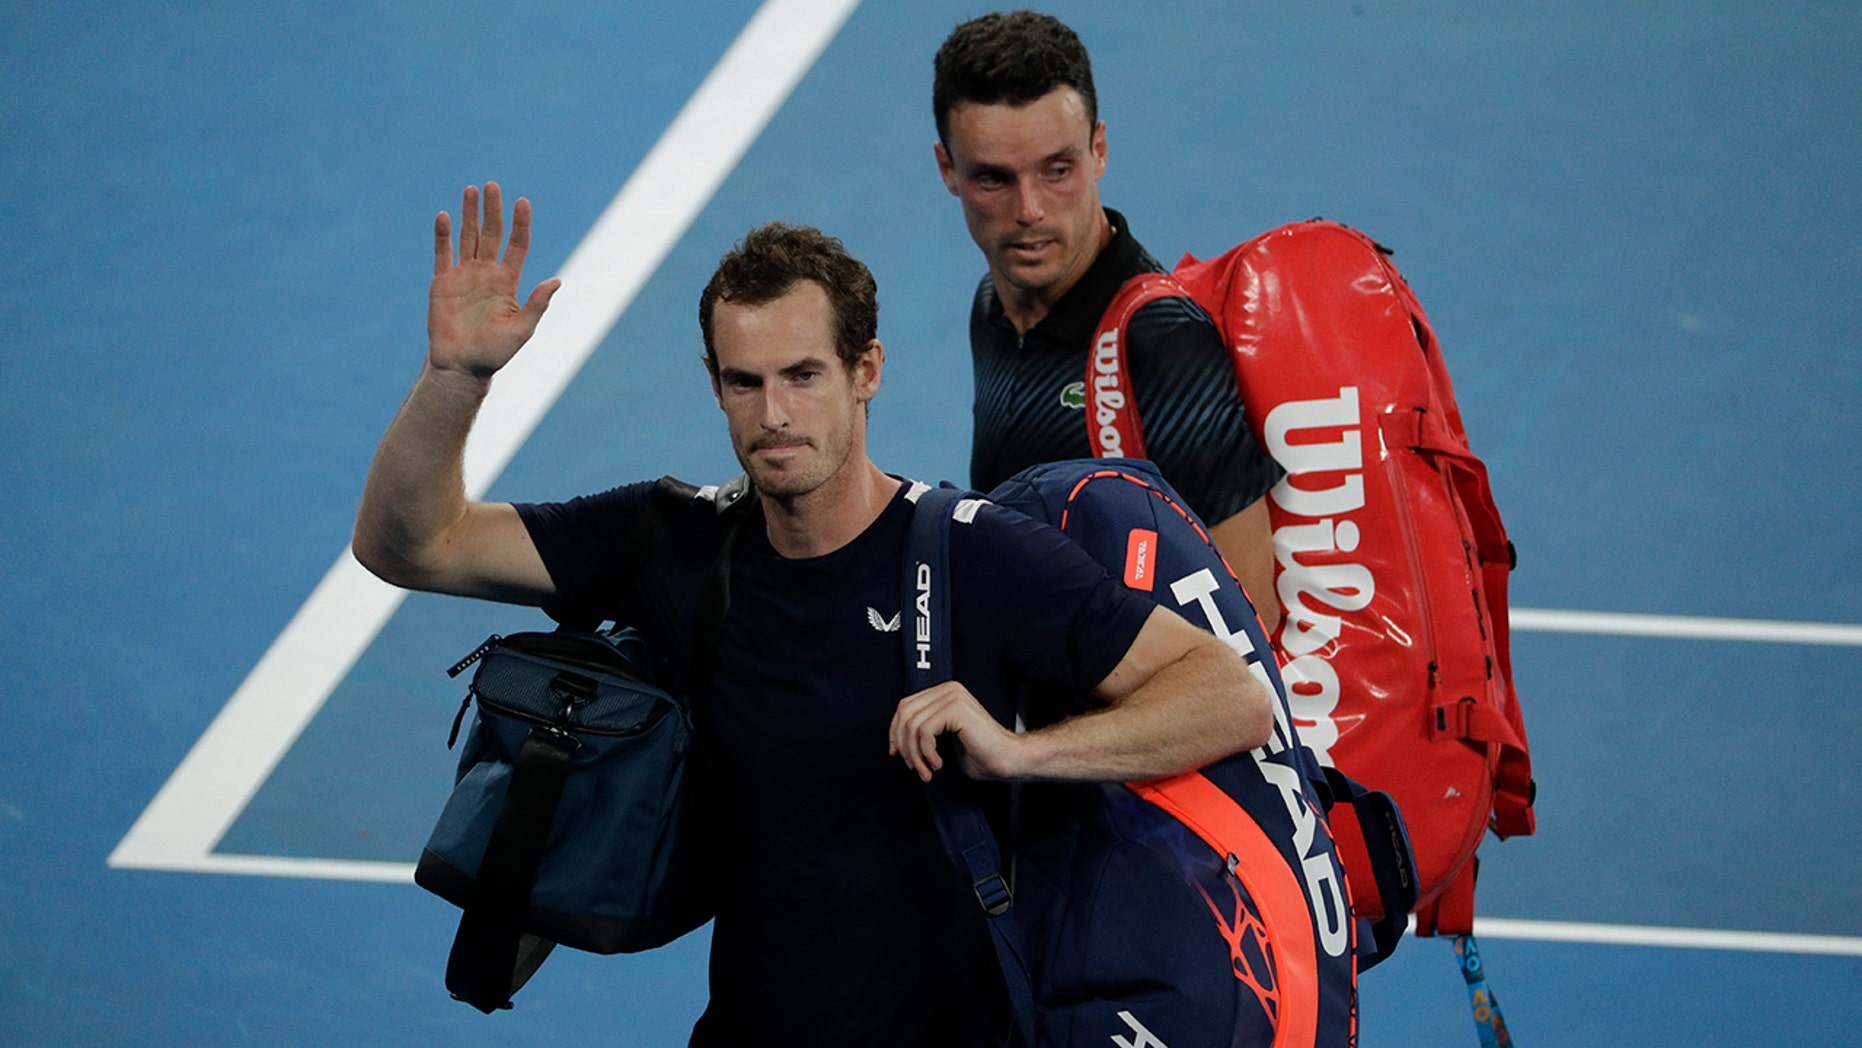 Australian Open: Retiring Andy Murray out in opening round